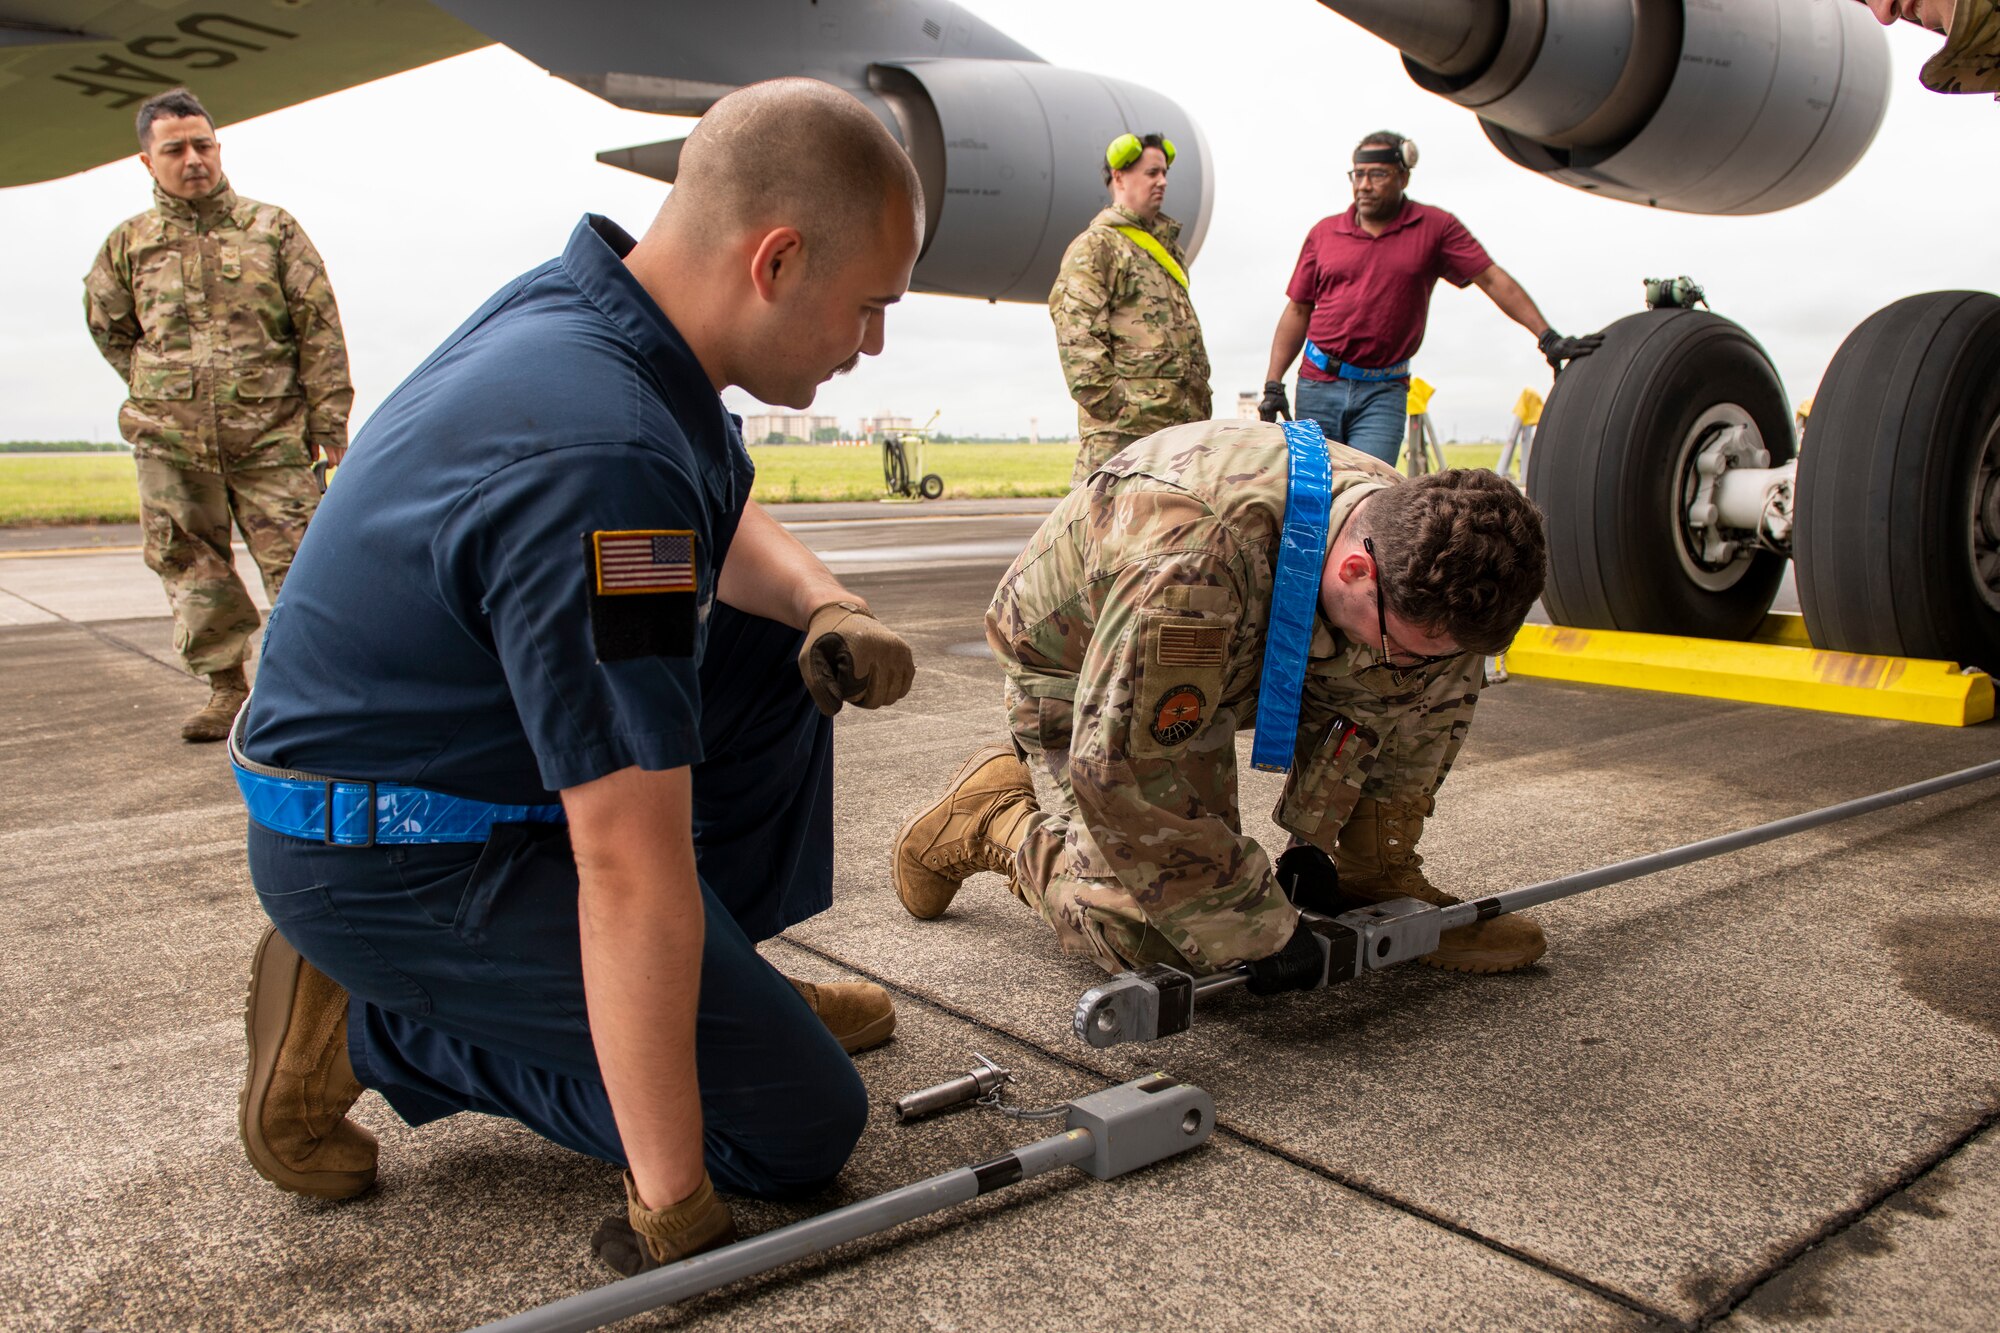 Tow airmen attach lengths of metal rods together